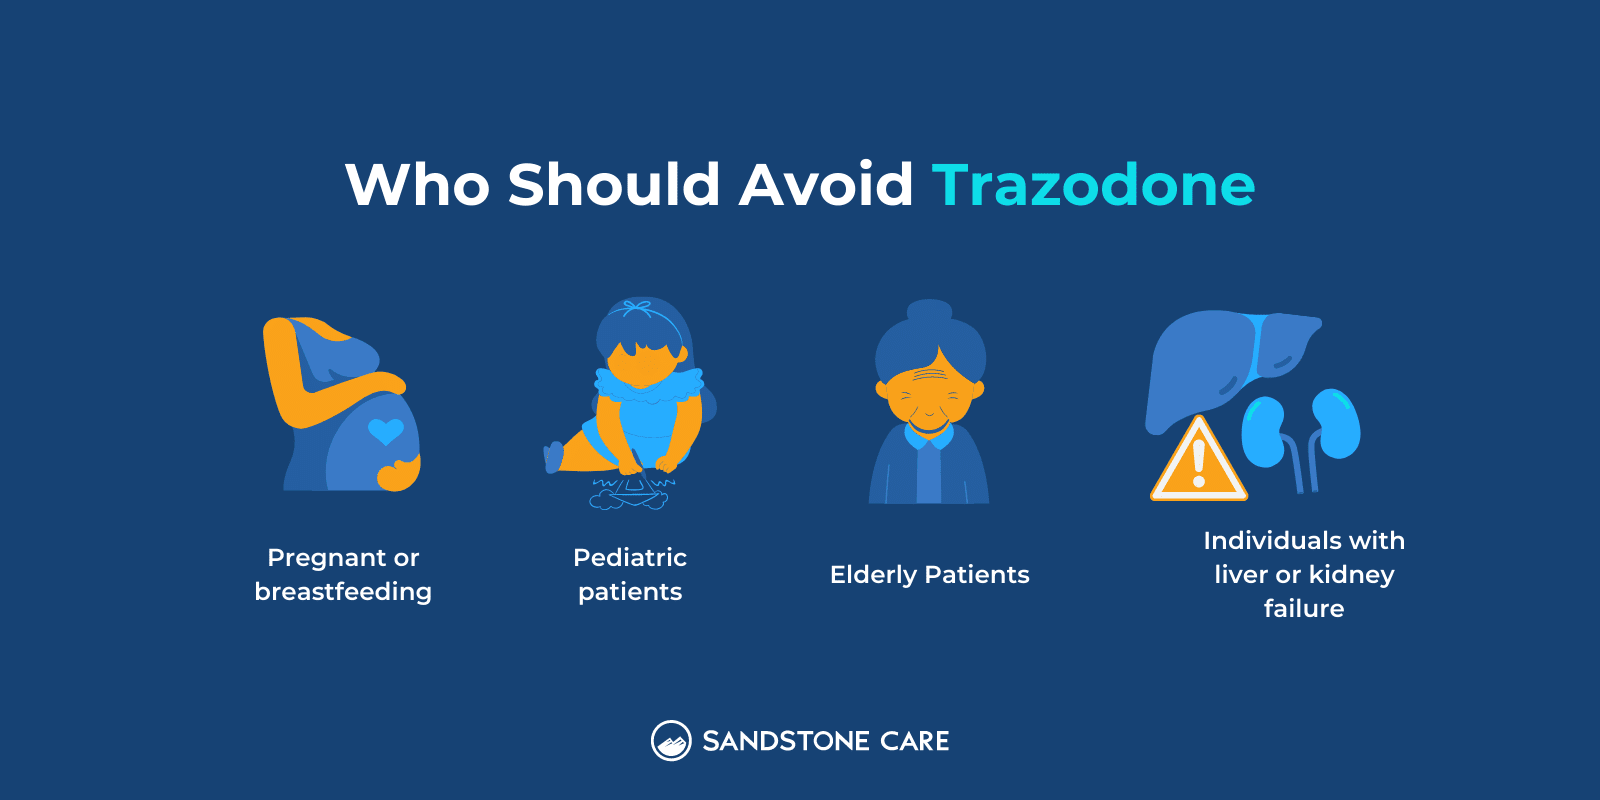 "Who should avoid trazodone" written on top of different conditions of people not fit for Trazodone illustrated with relevant illustrations: "Pregnant or breastfeeding, pediatric patients, elderly patients, individuals with liver or kidney failure"